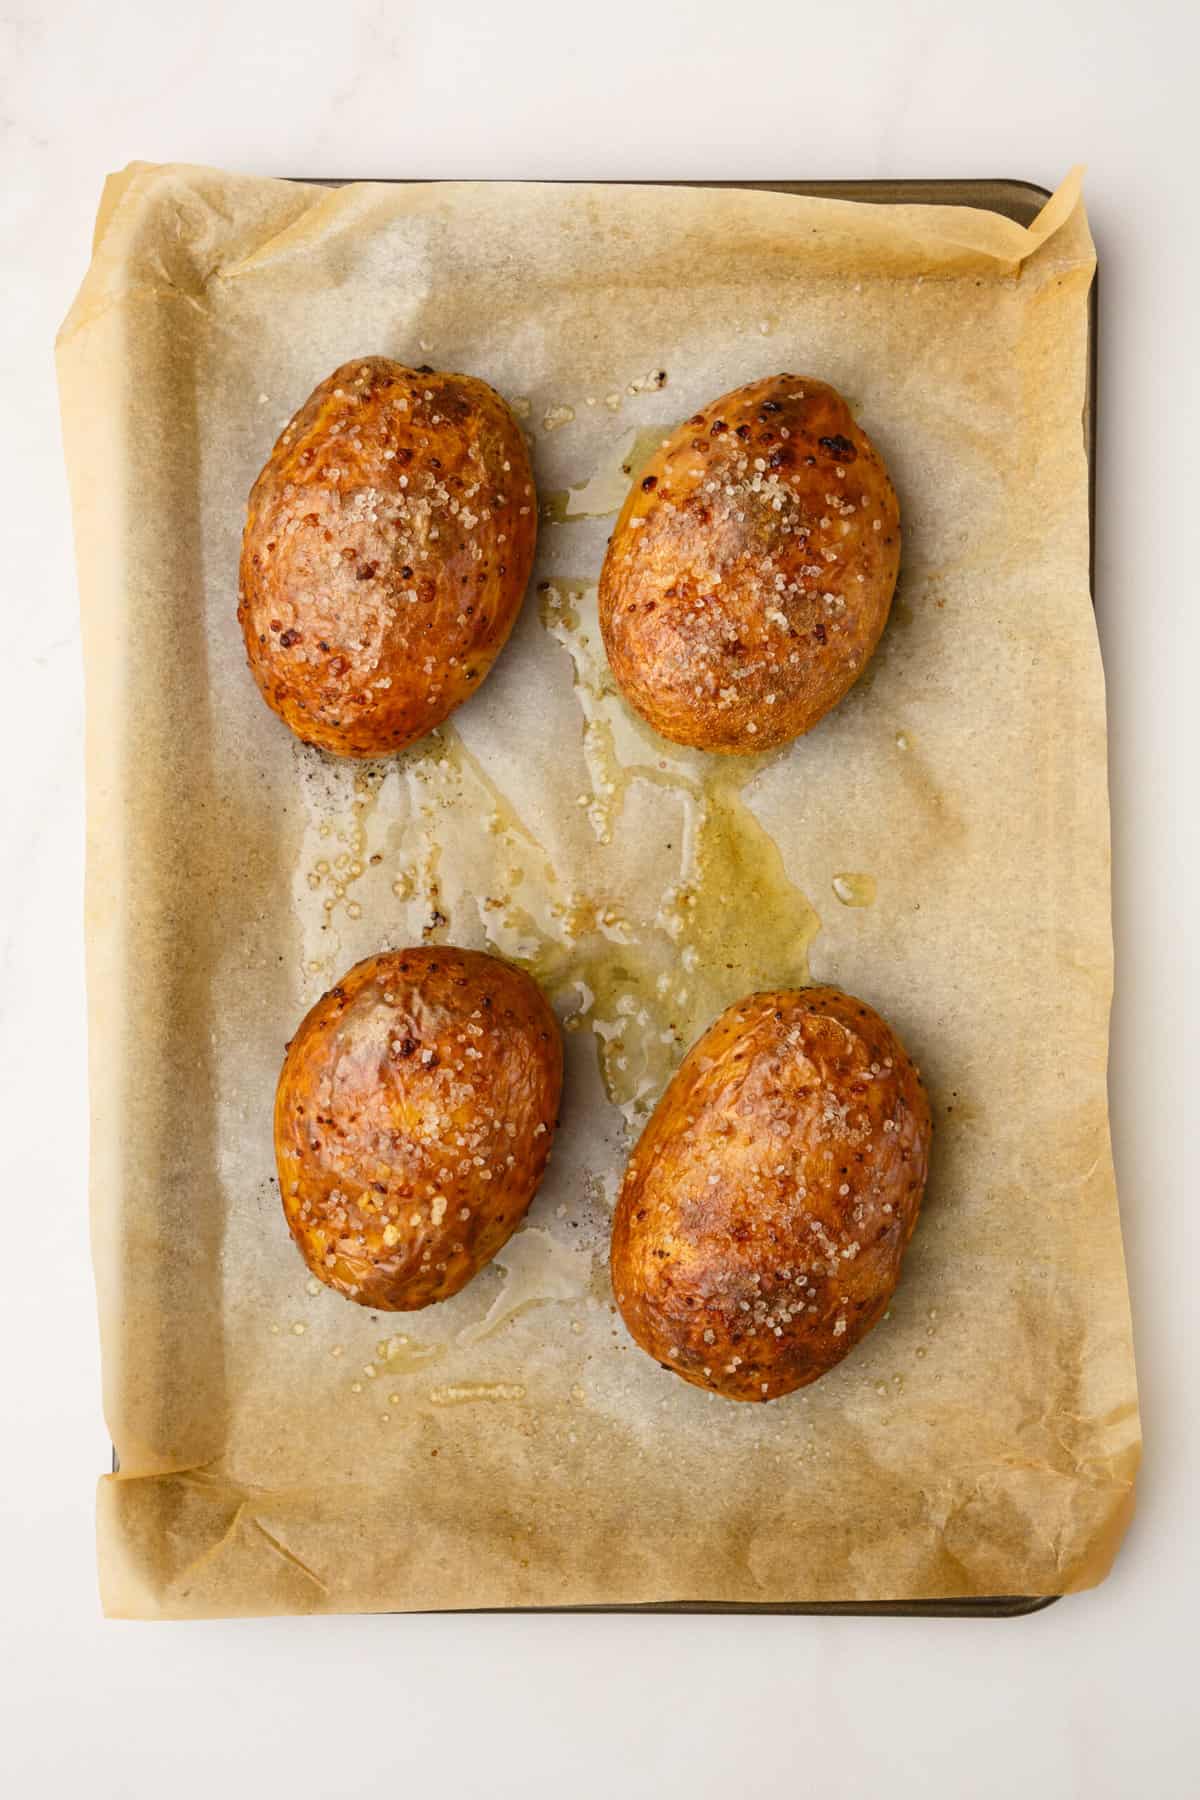 four baked russet potatoes sitting on a parchment lined baking sheet